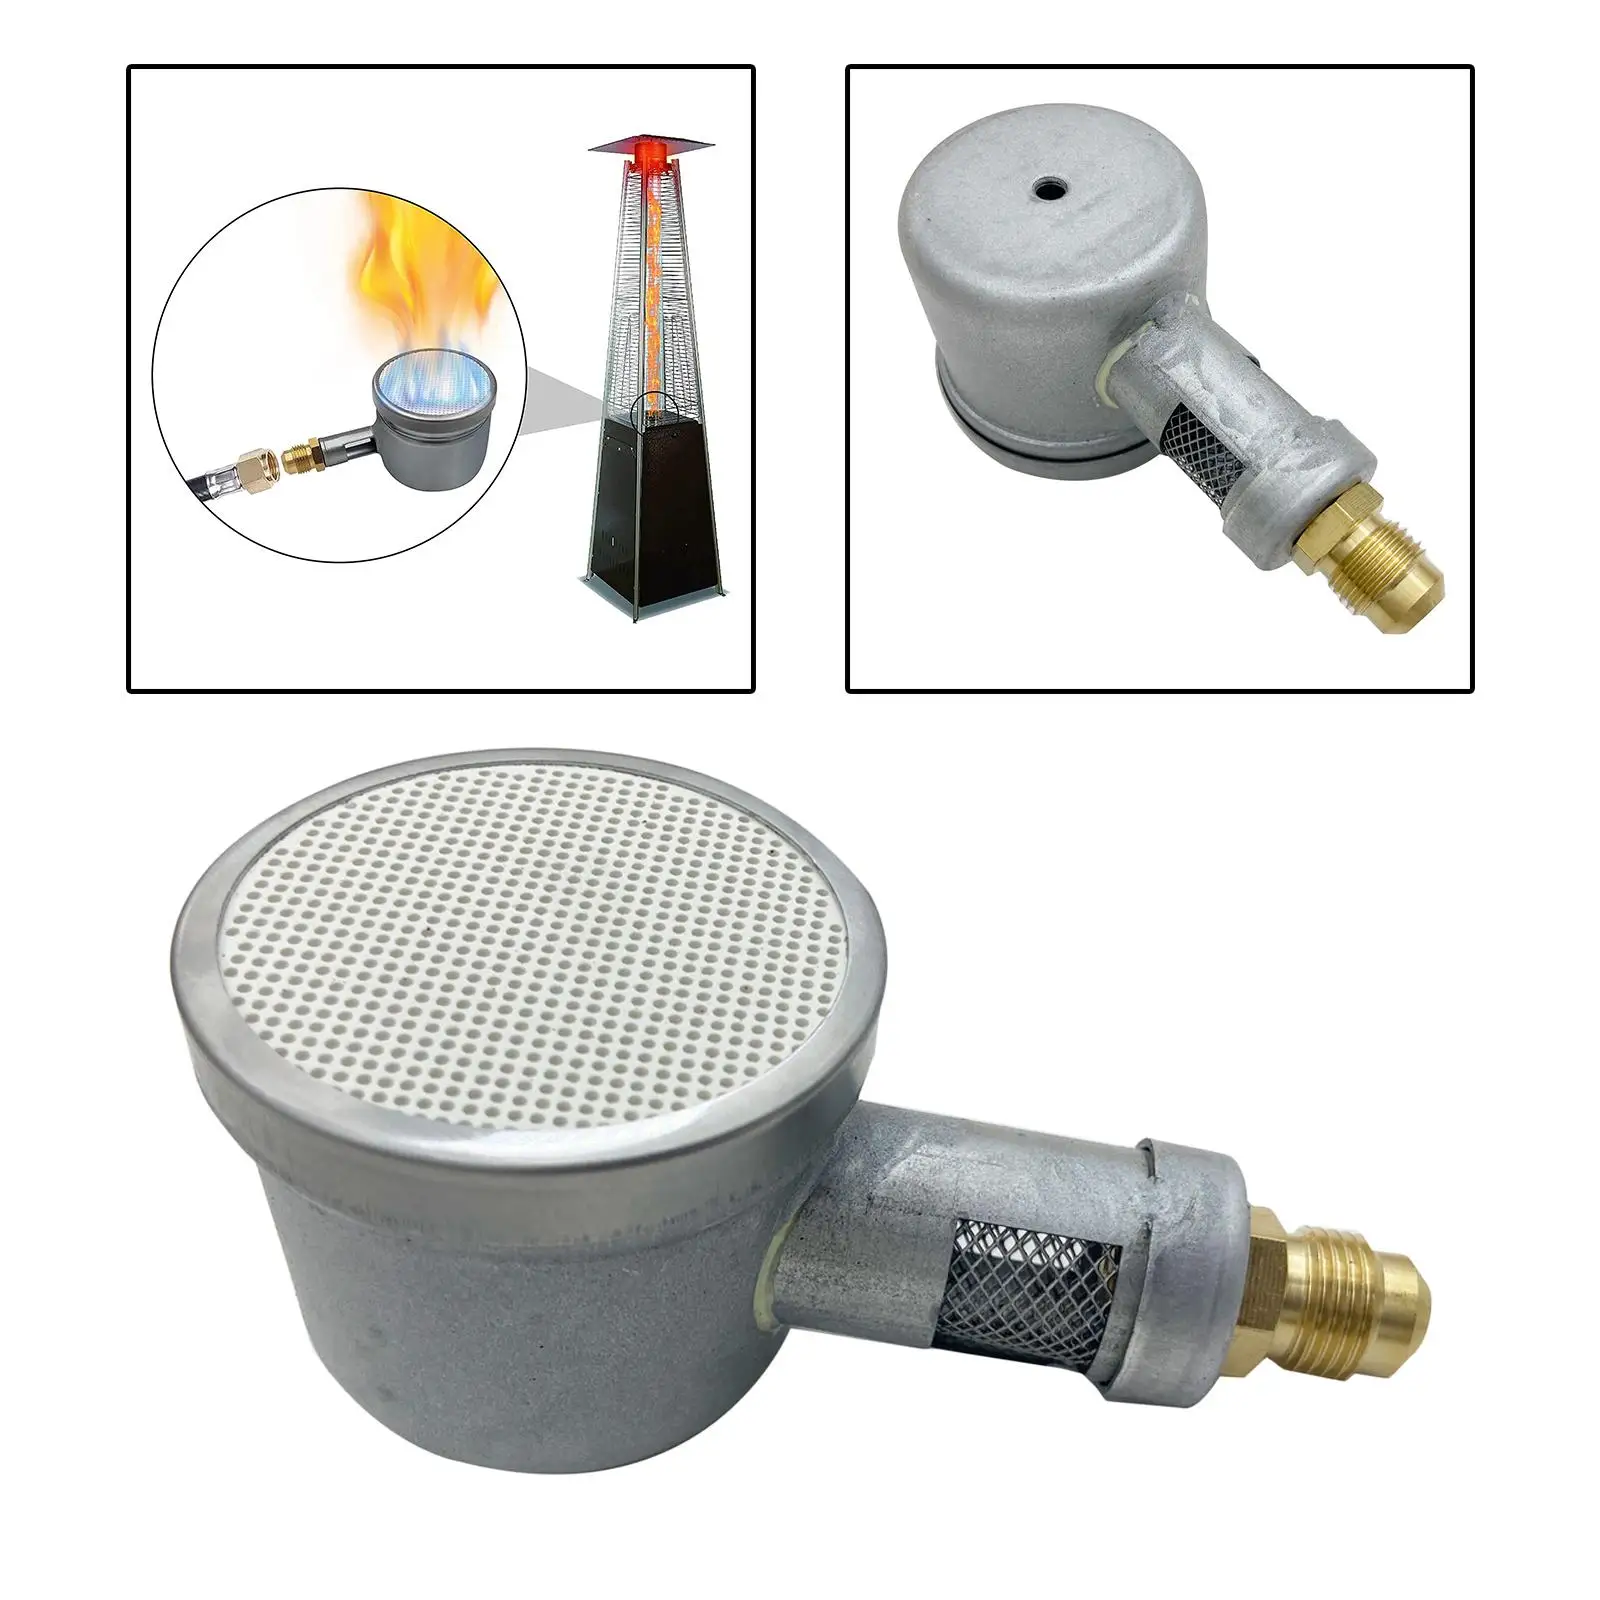 Round Burner Head Lightweight Heater Parts Heater Repalcement for Picnic